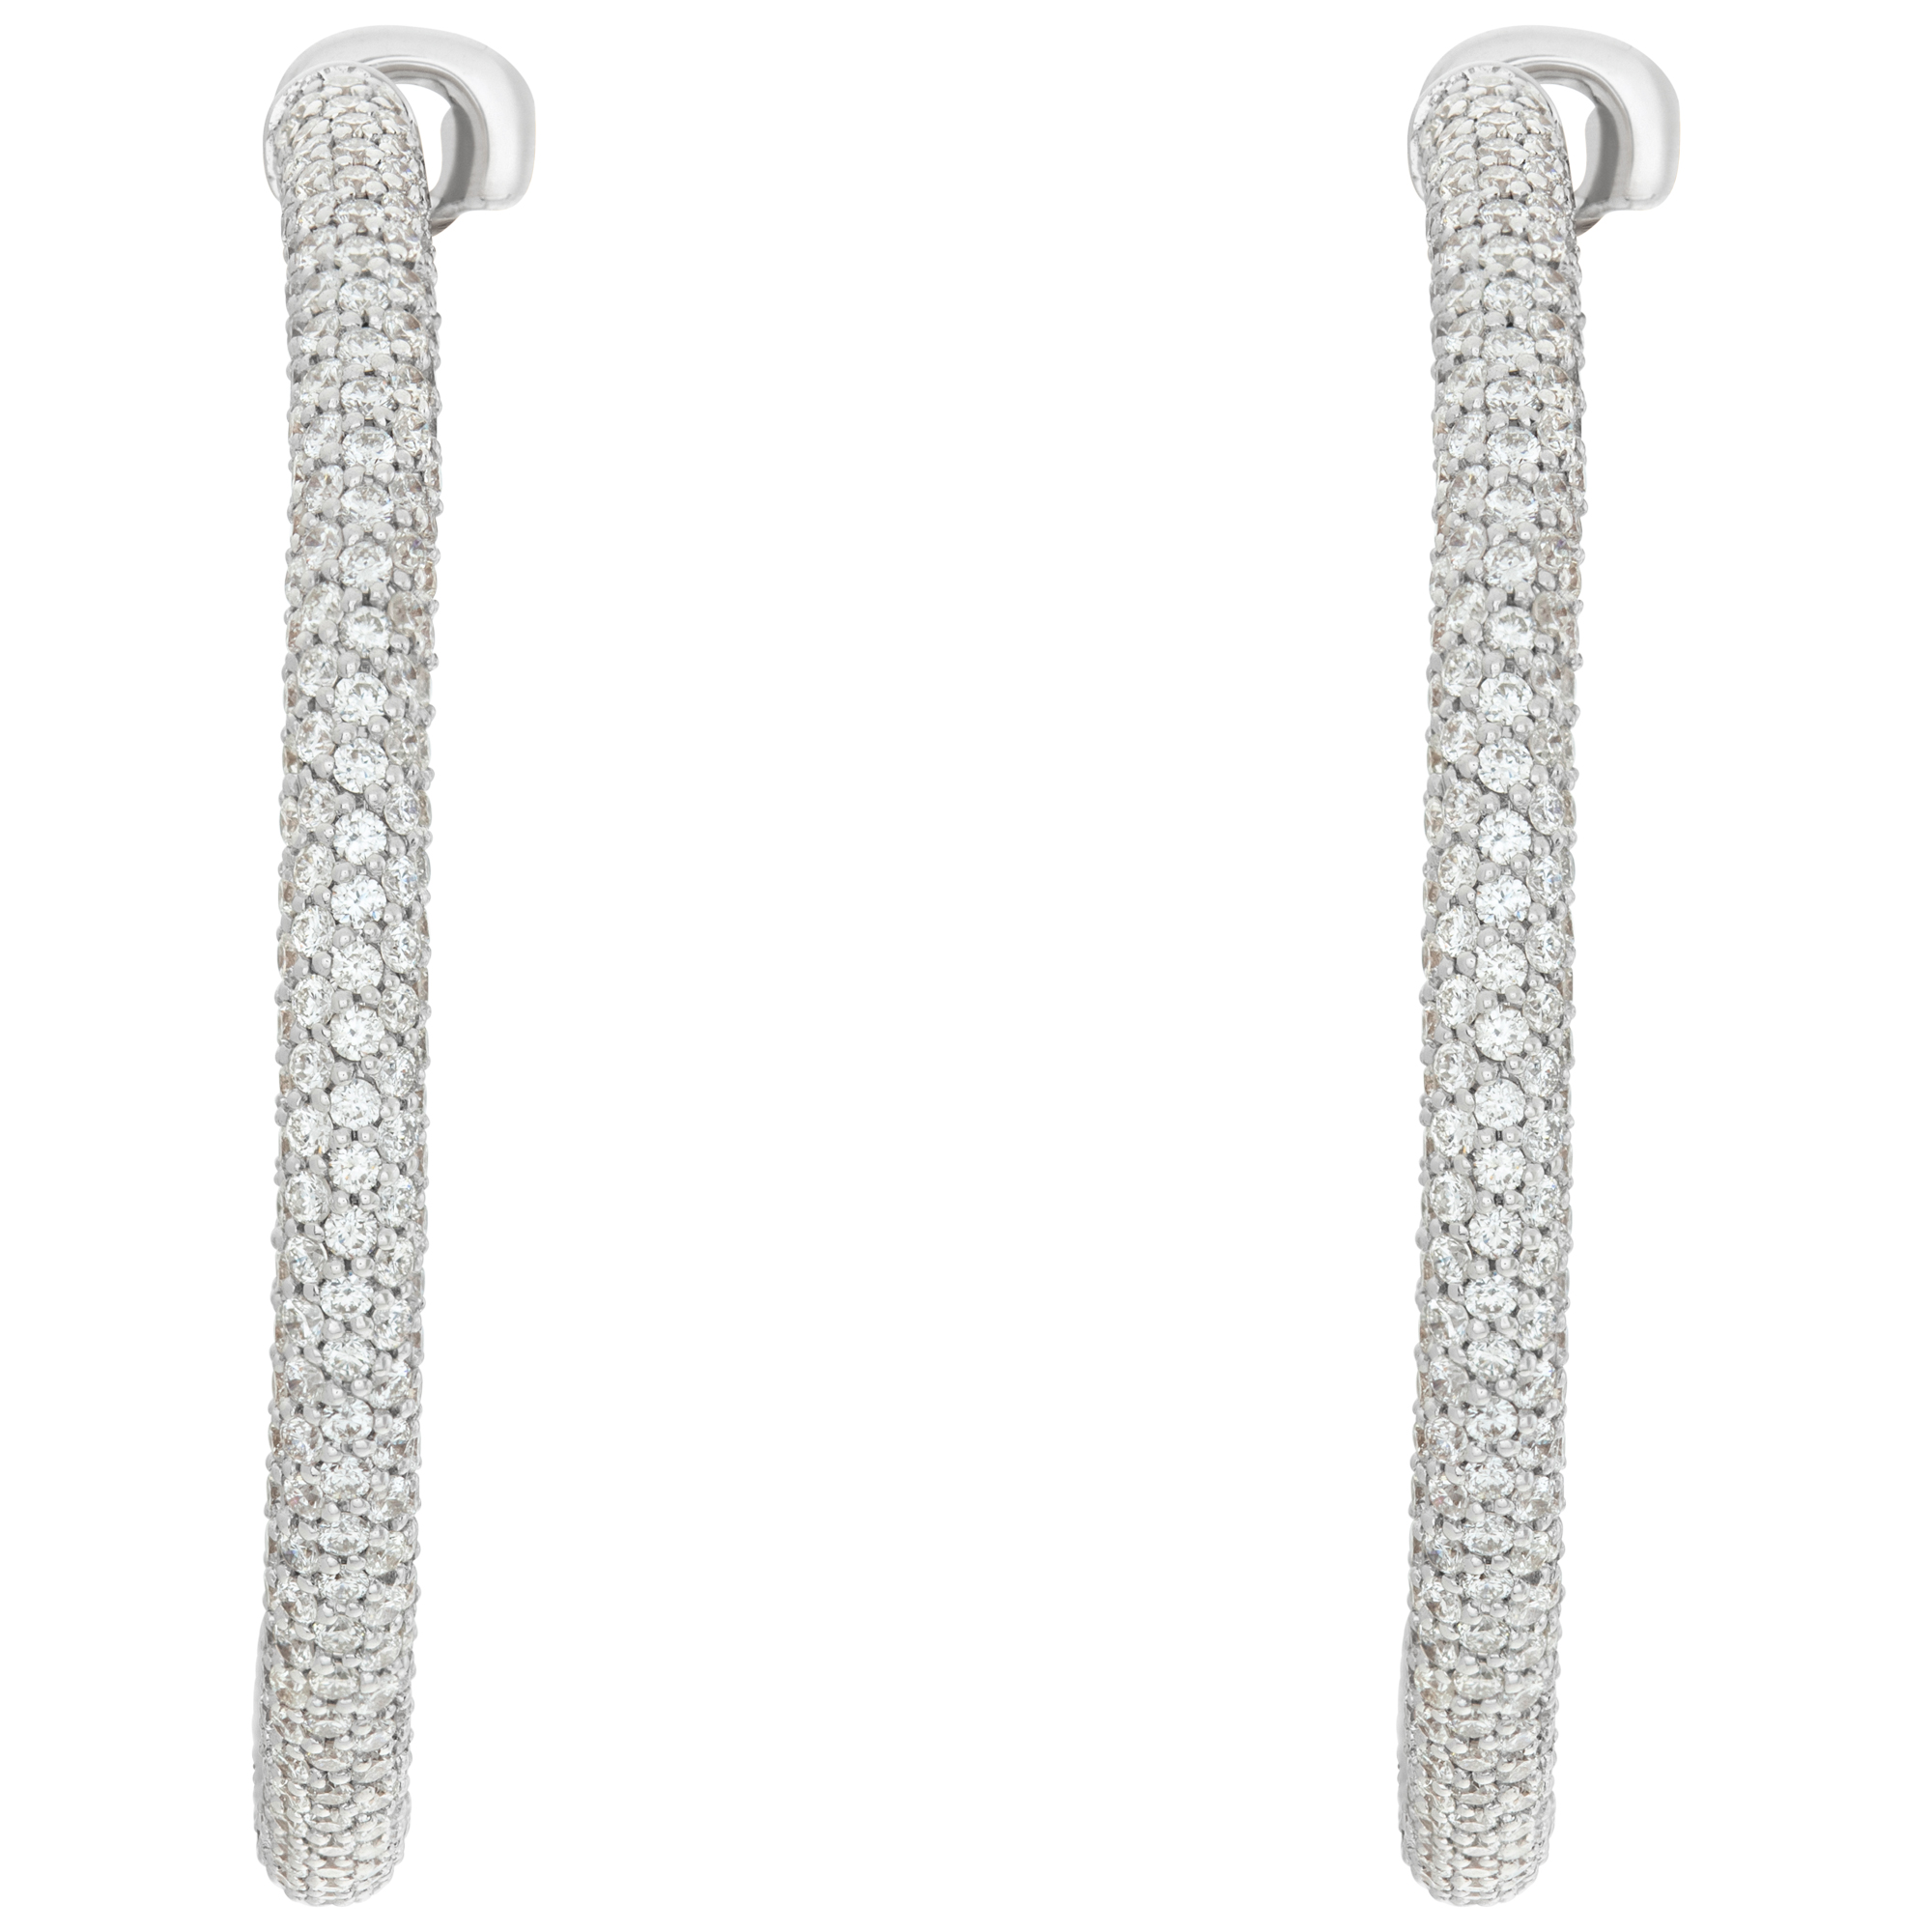 Stunning 18k white gold pave diamond hoop earrings with 6.9 carats in round brilliant diamonds image 1